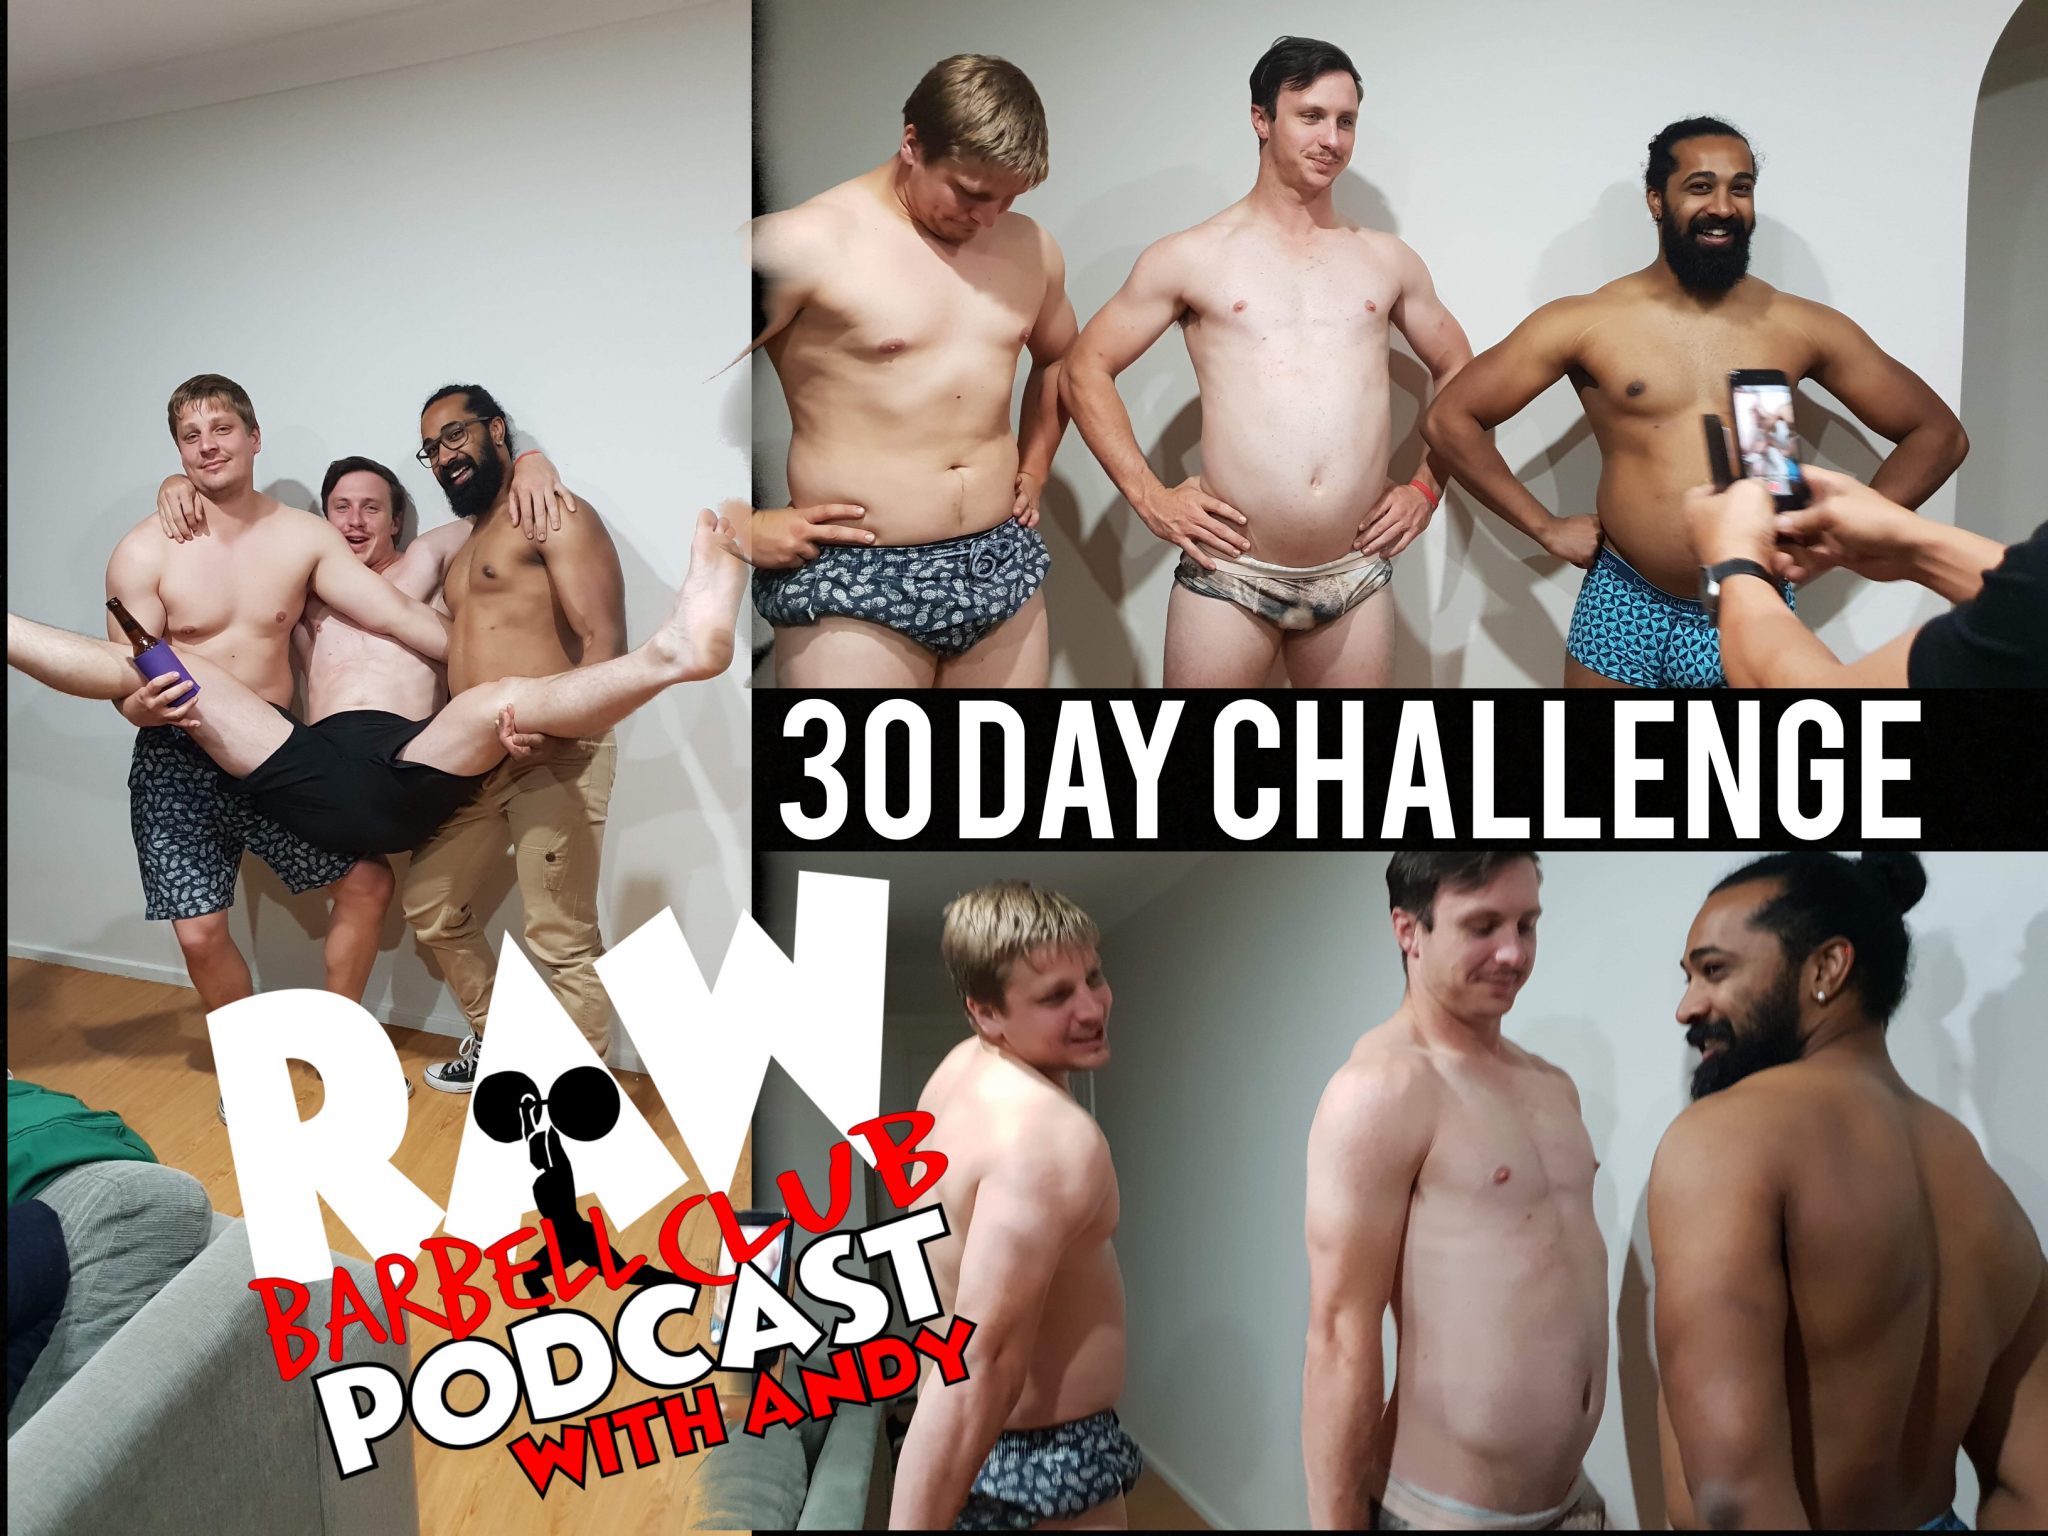 30 Day Challenge with Harry & Jack